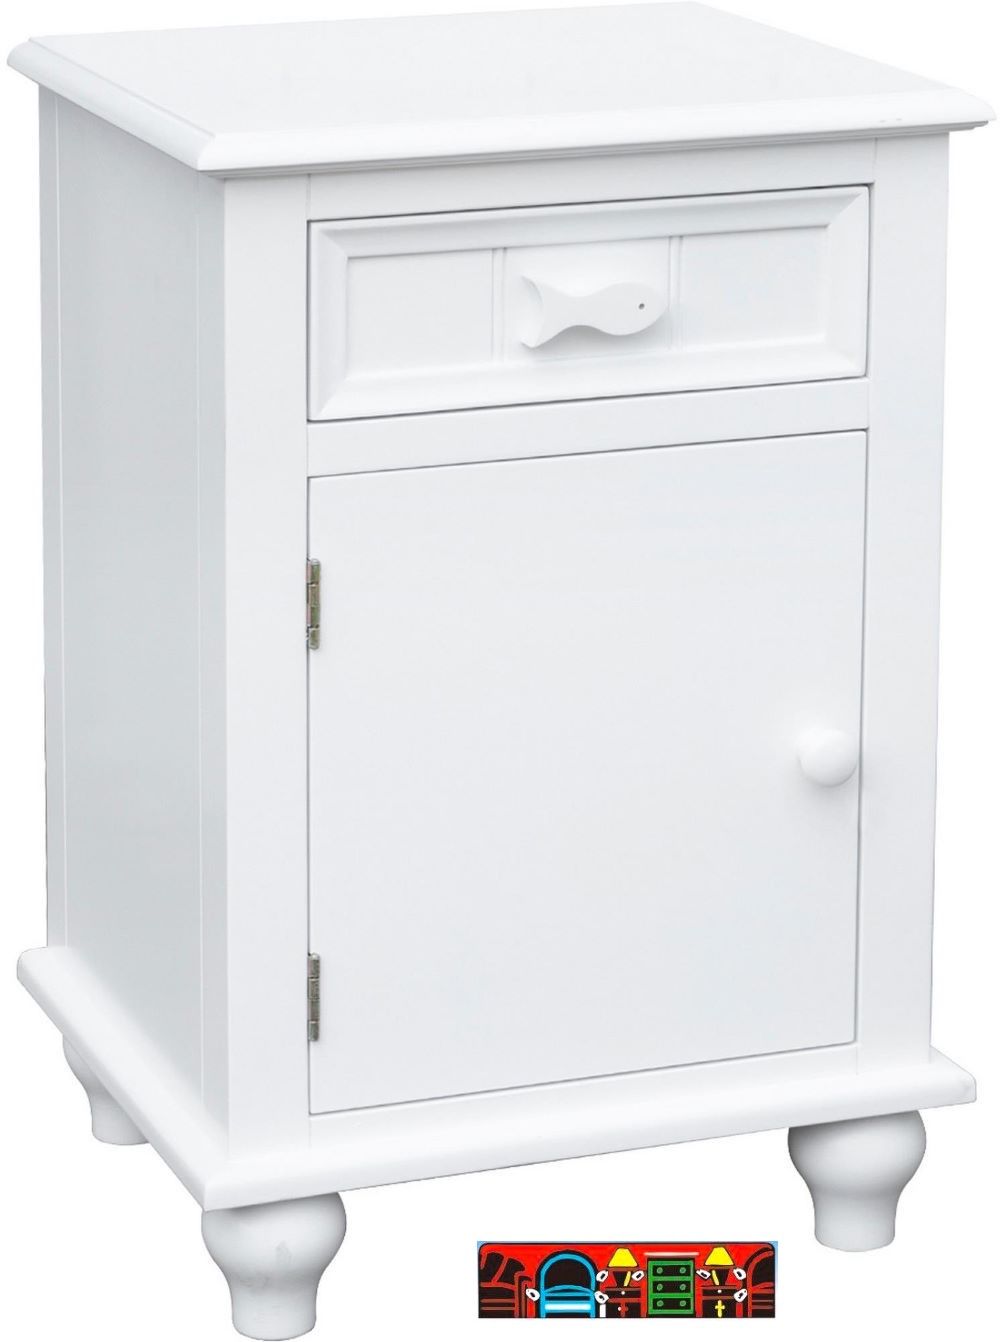 The Fishtails Door Nightstand, crafted from wood and finished in white. Features One drawer and one door. It is available at Bratz-CFW in Fort Myers, FL.